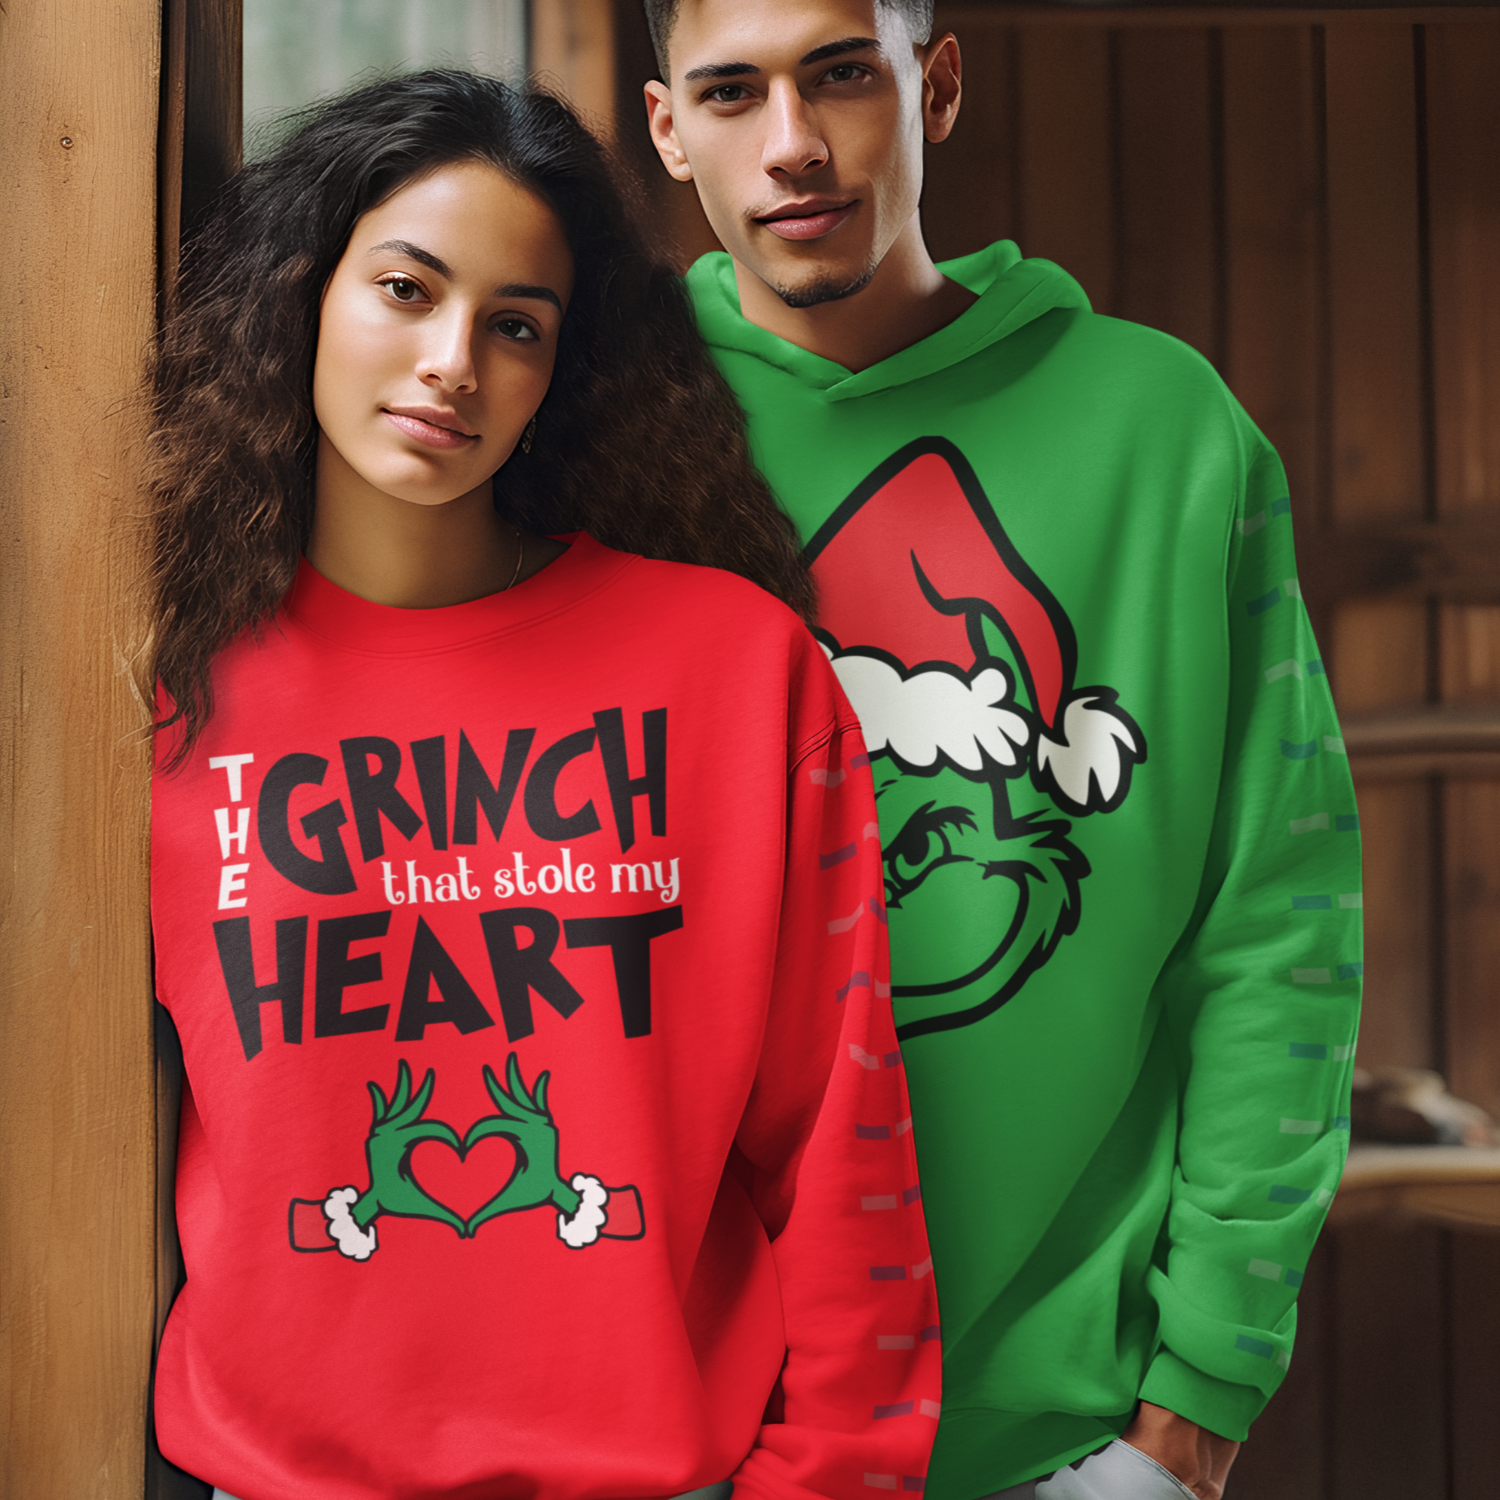 The Grinch that stole my heart t shirt, matching couple christmas shirt, christmas shirts couples - Wilson Design Group